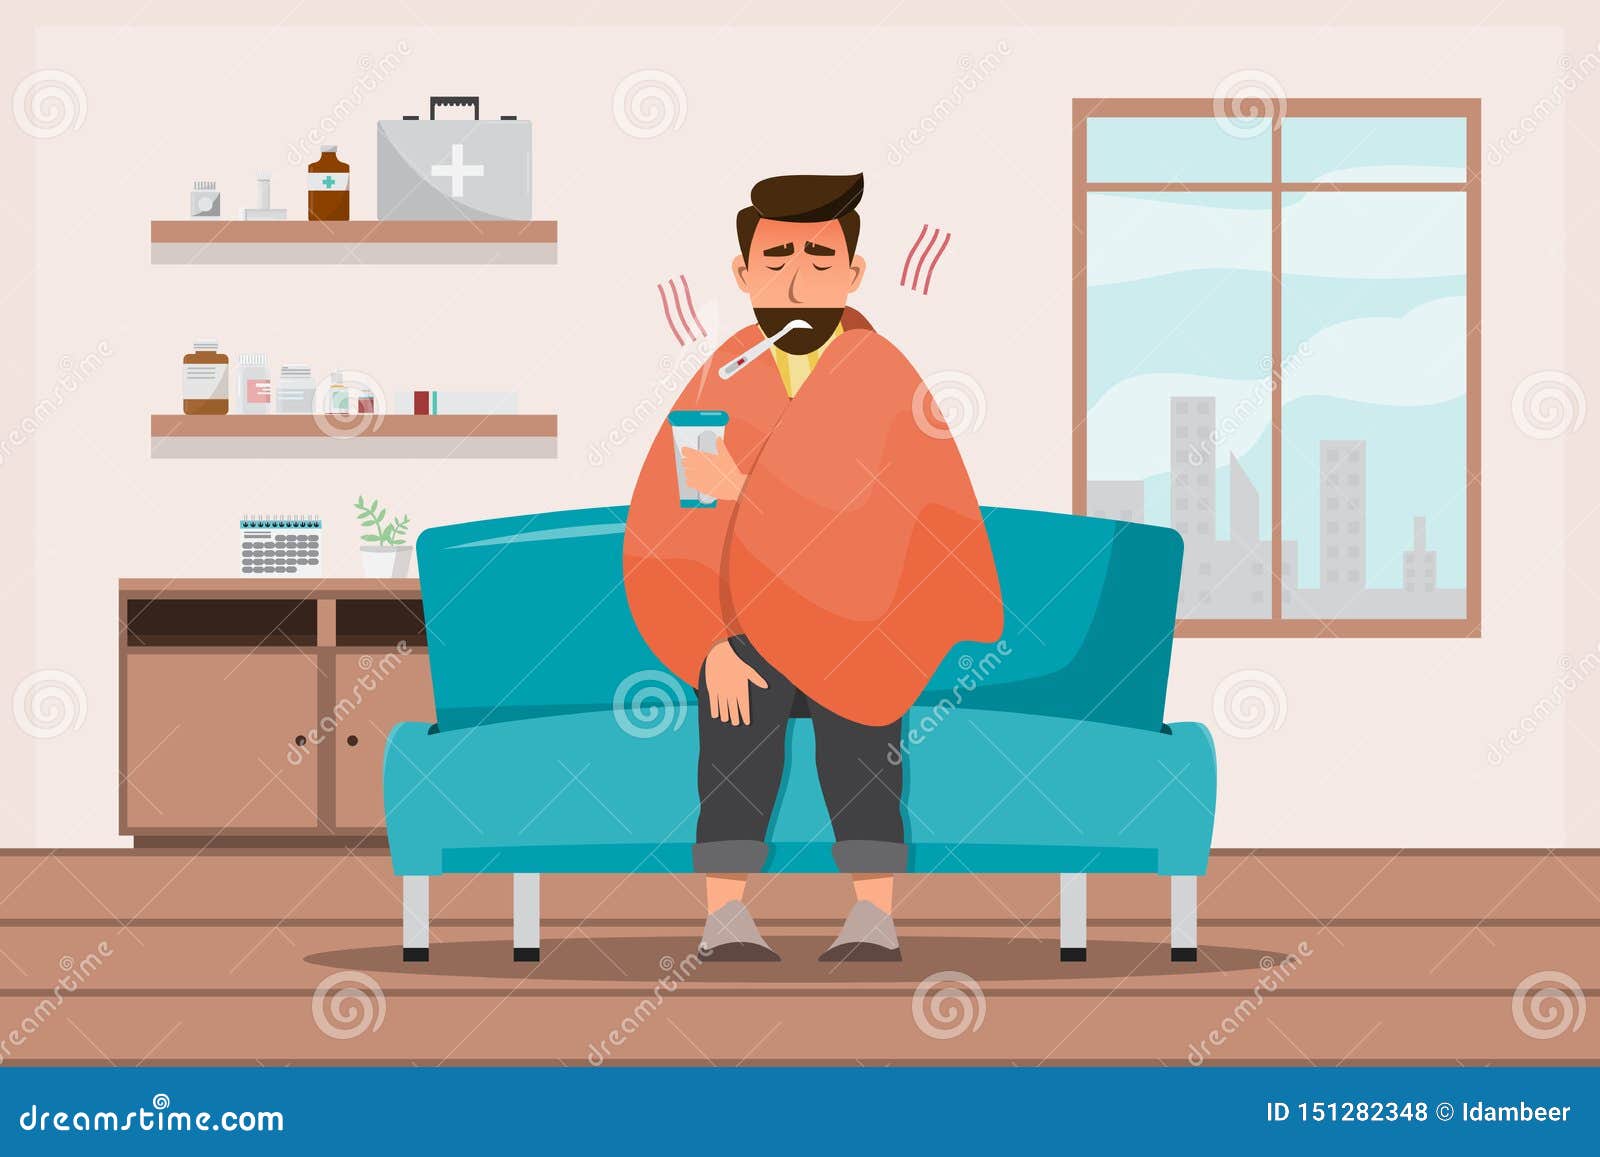 Sick Man Having a Cold Sit in the Room Stock Illustration - Illustration of  background, sickness: 151282348